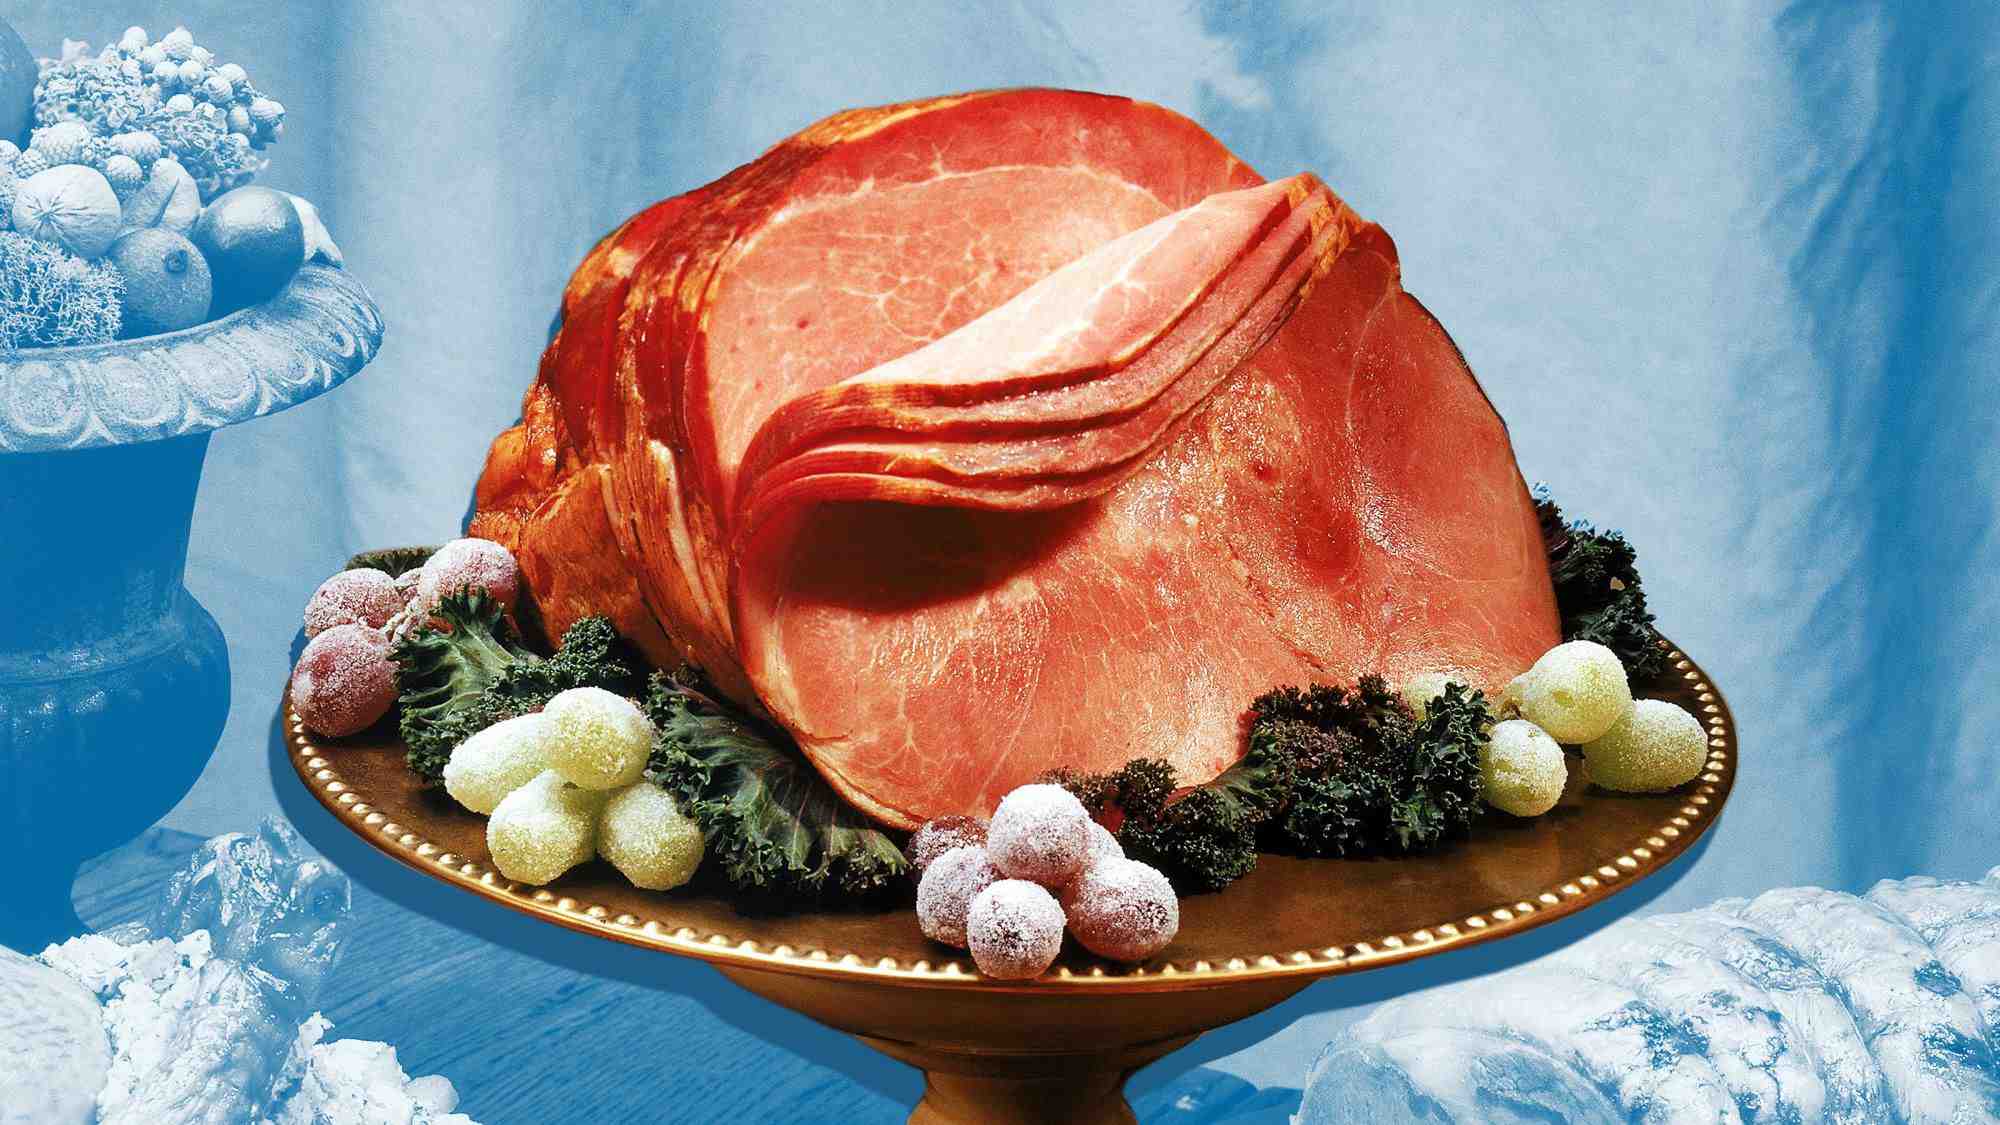 Is cooked ham good for you?